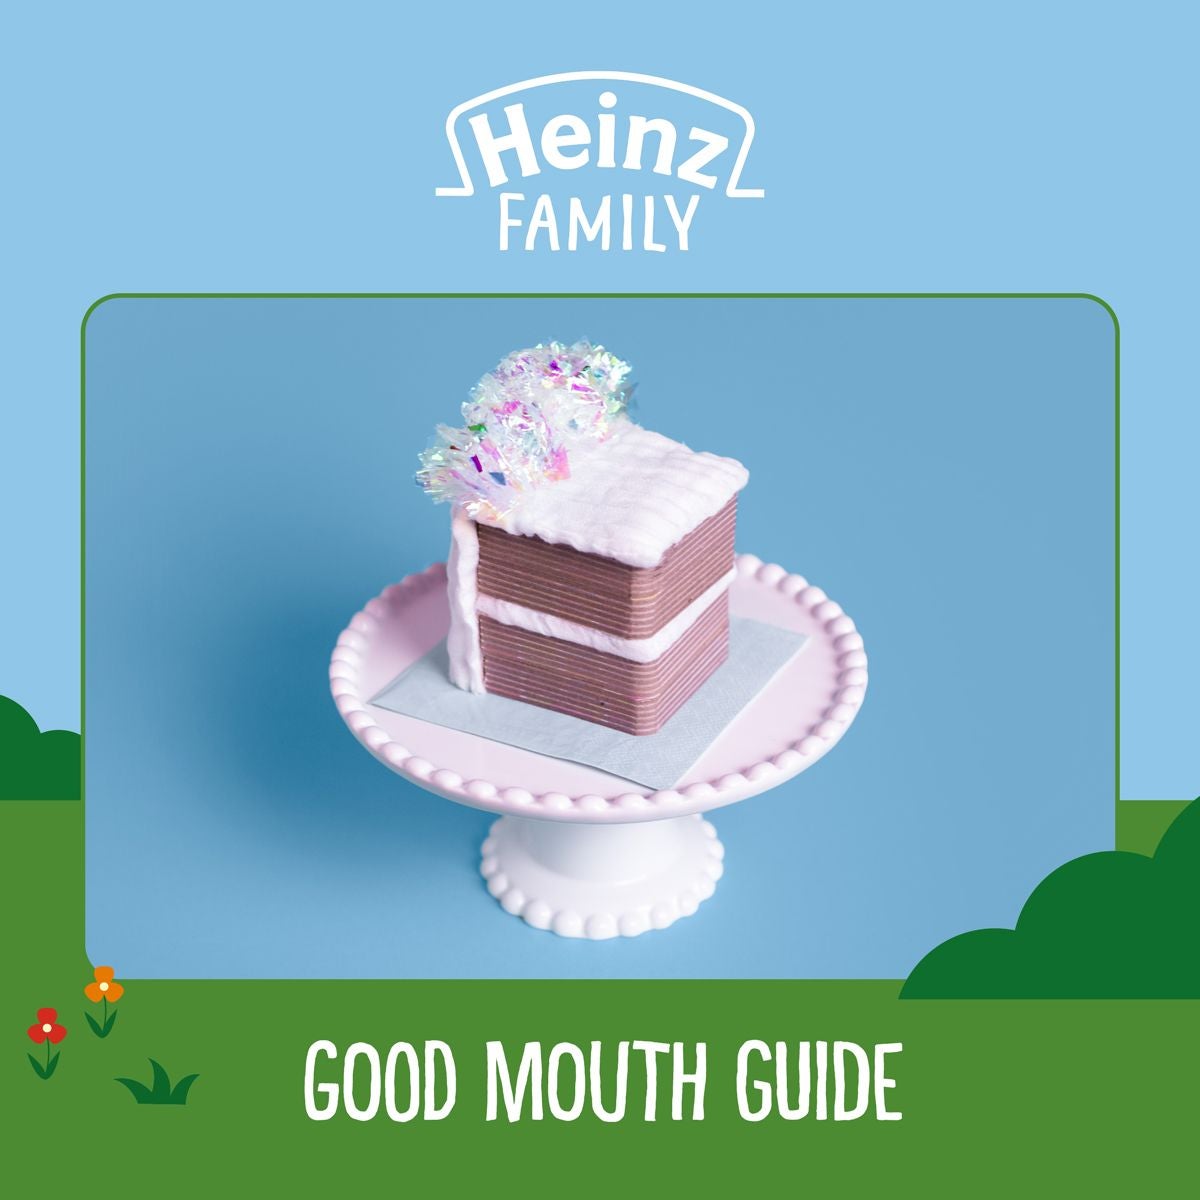 GOOD MOUTH GUIDE